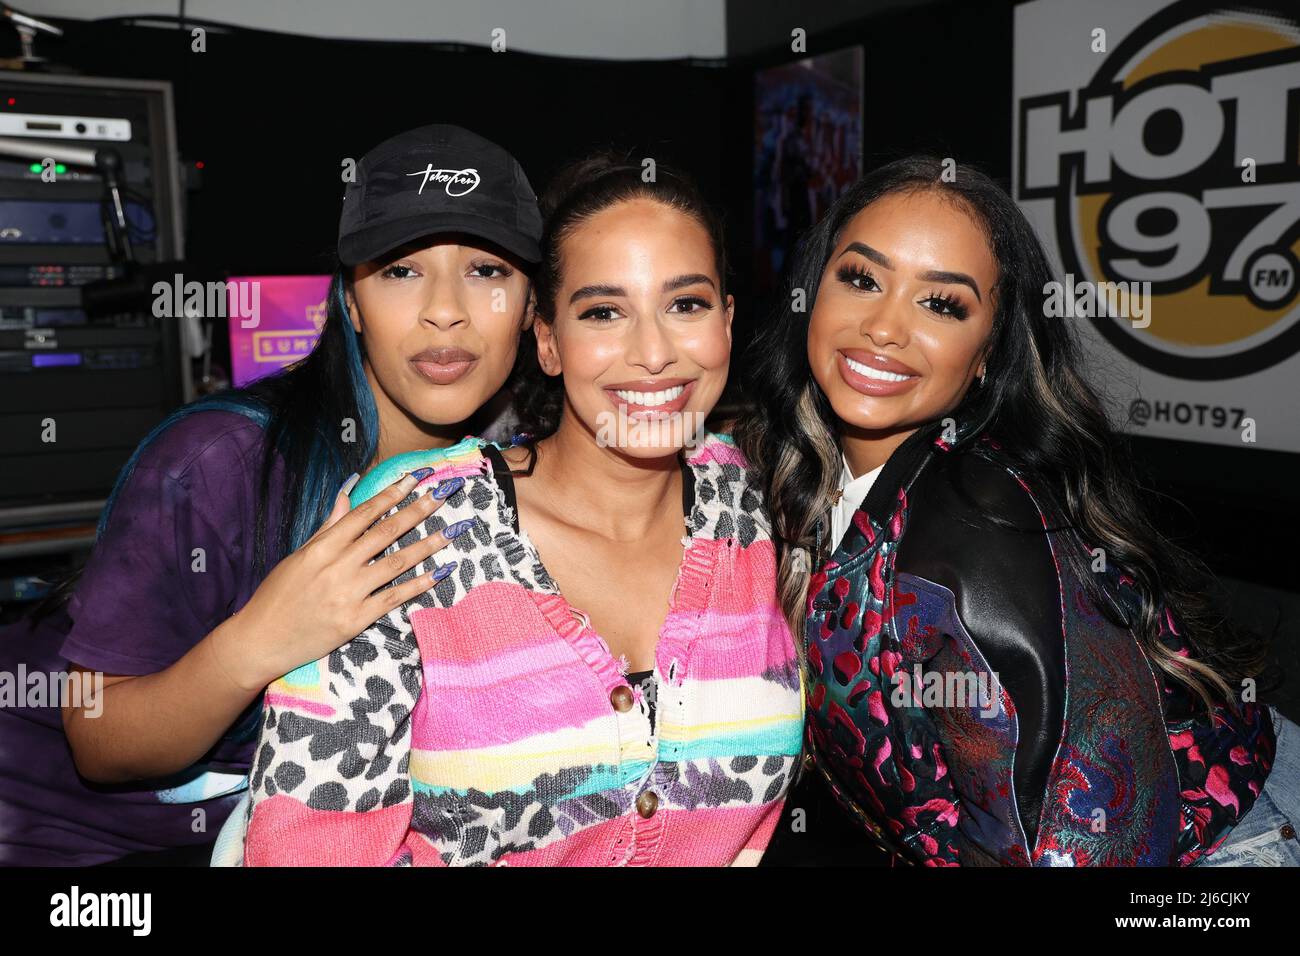 NEW YORK, NY- APRIL 29: Miabelle, Nessa and DreamDoll at the Hot 97 Summer Jam 2022 Announcement Party in New York City on April 29, 2022. Credit: Walik Goshorn/MediaPunch Stock Photo